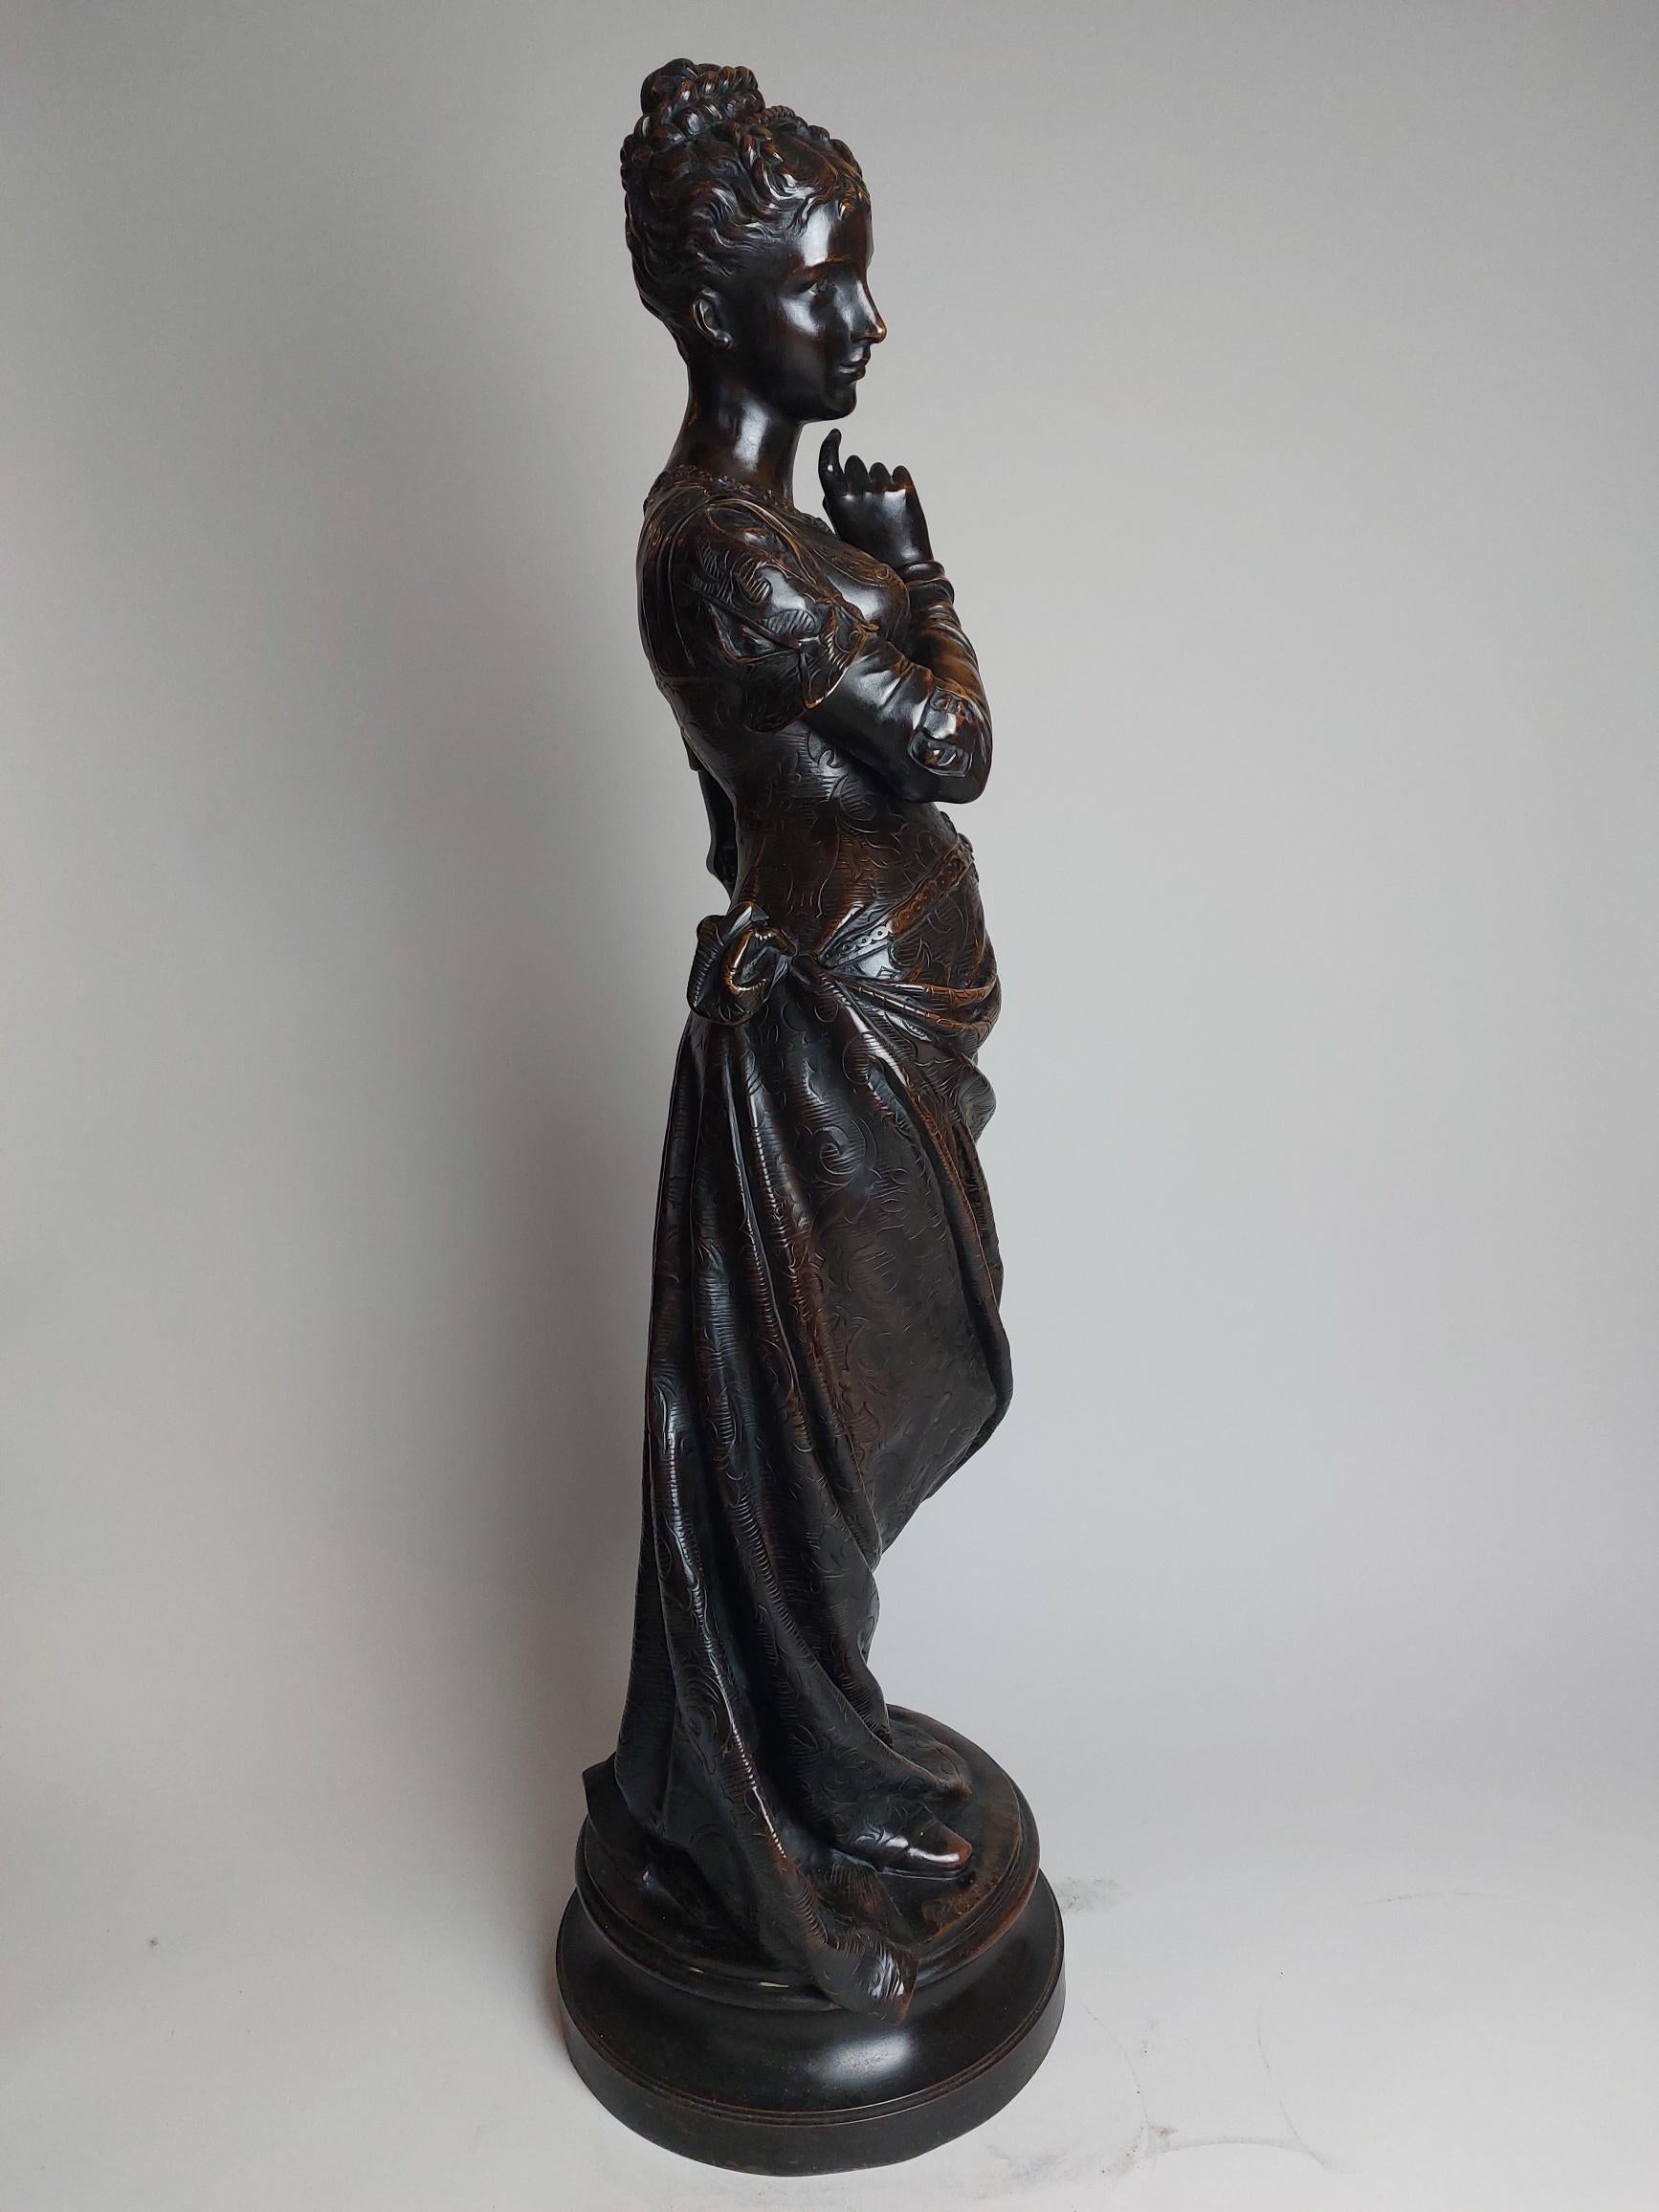 Renaissance Revival Classical 19th Century French Bronze Titled ‘Autumn’ Signed Detrier For Sale